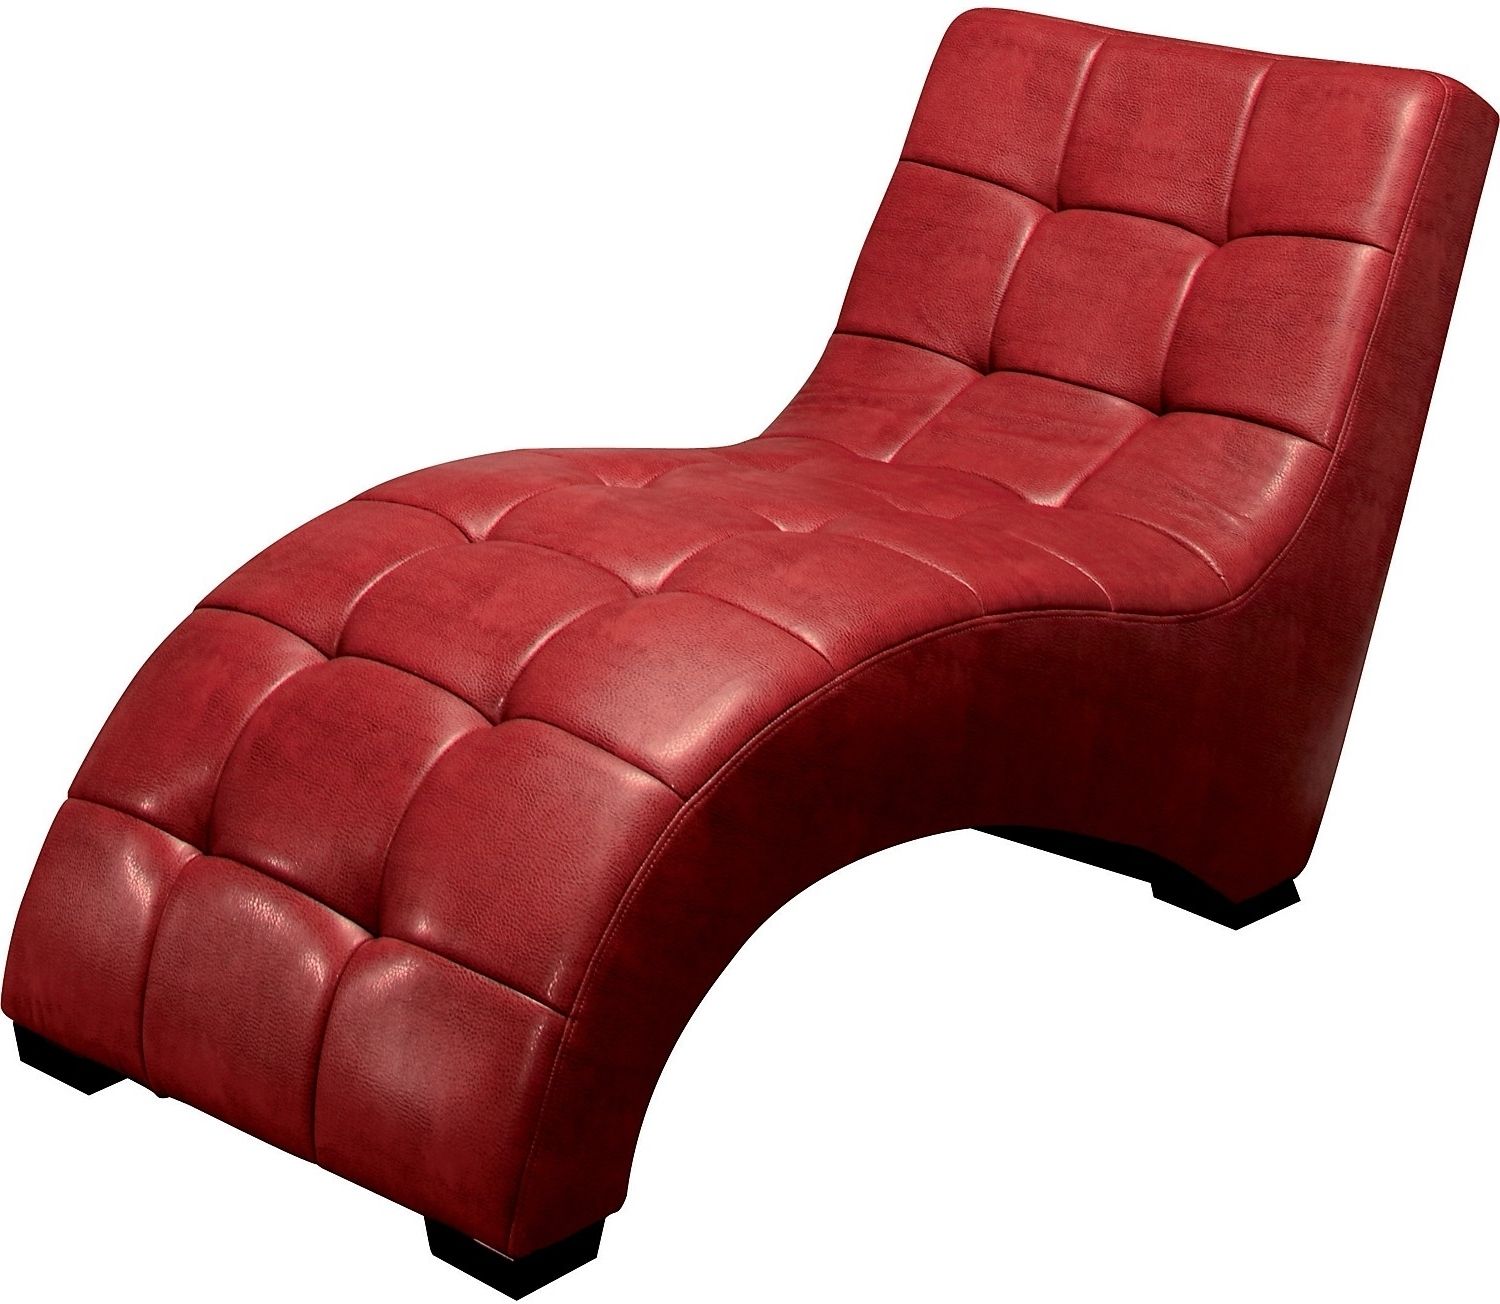 Well Known Red Chaise Lounge Pertaining To Leather Chair Idea 1 For Red Chaise Lounges (View 12 of 15)